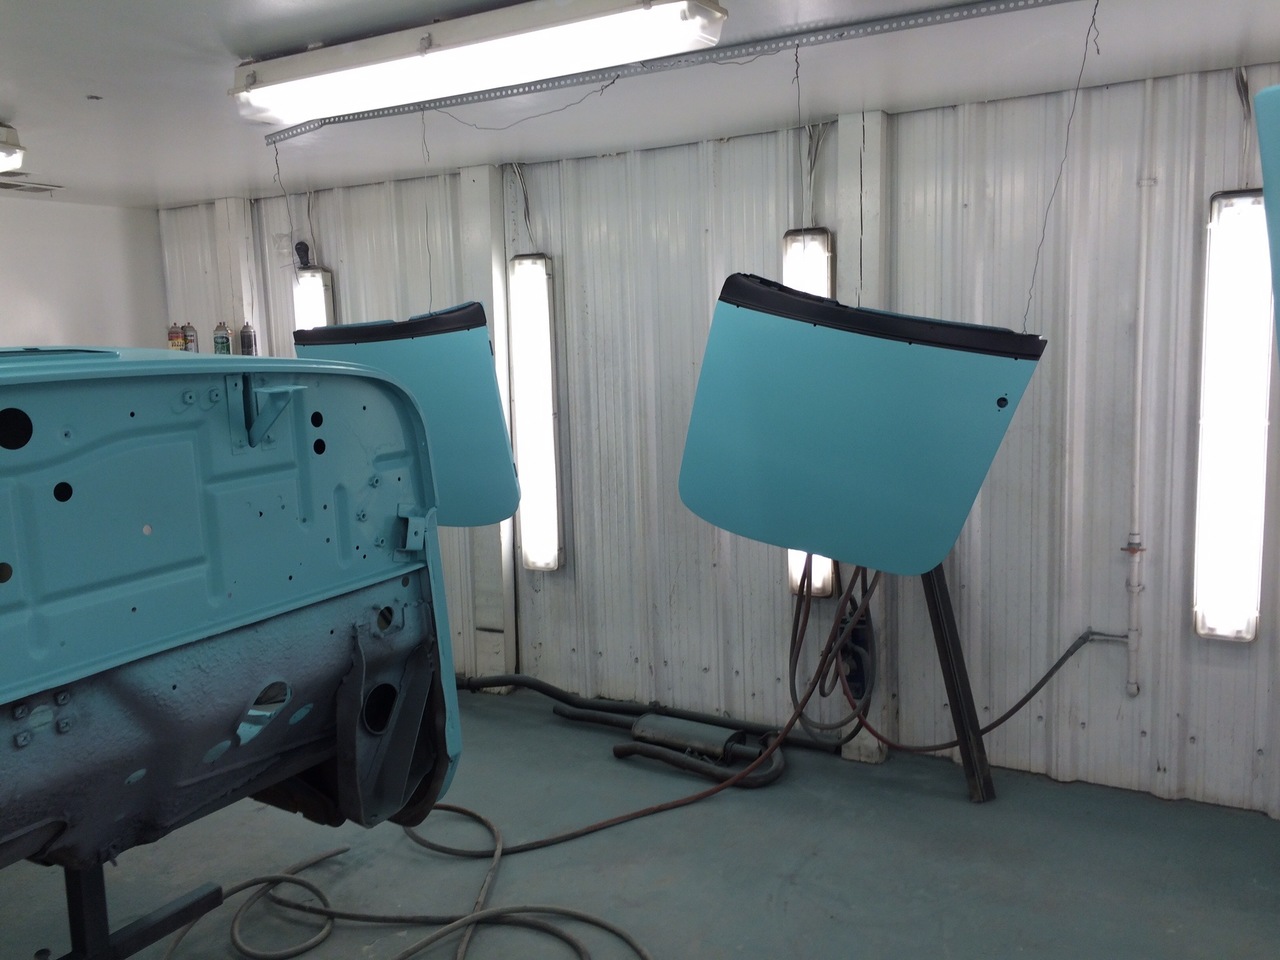 Jeepster rear panel
			  paint